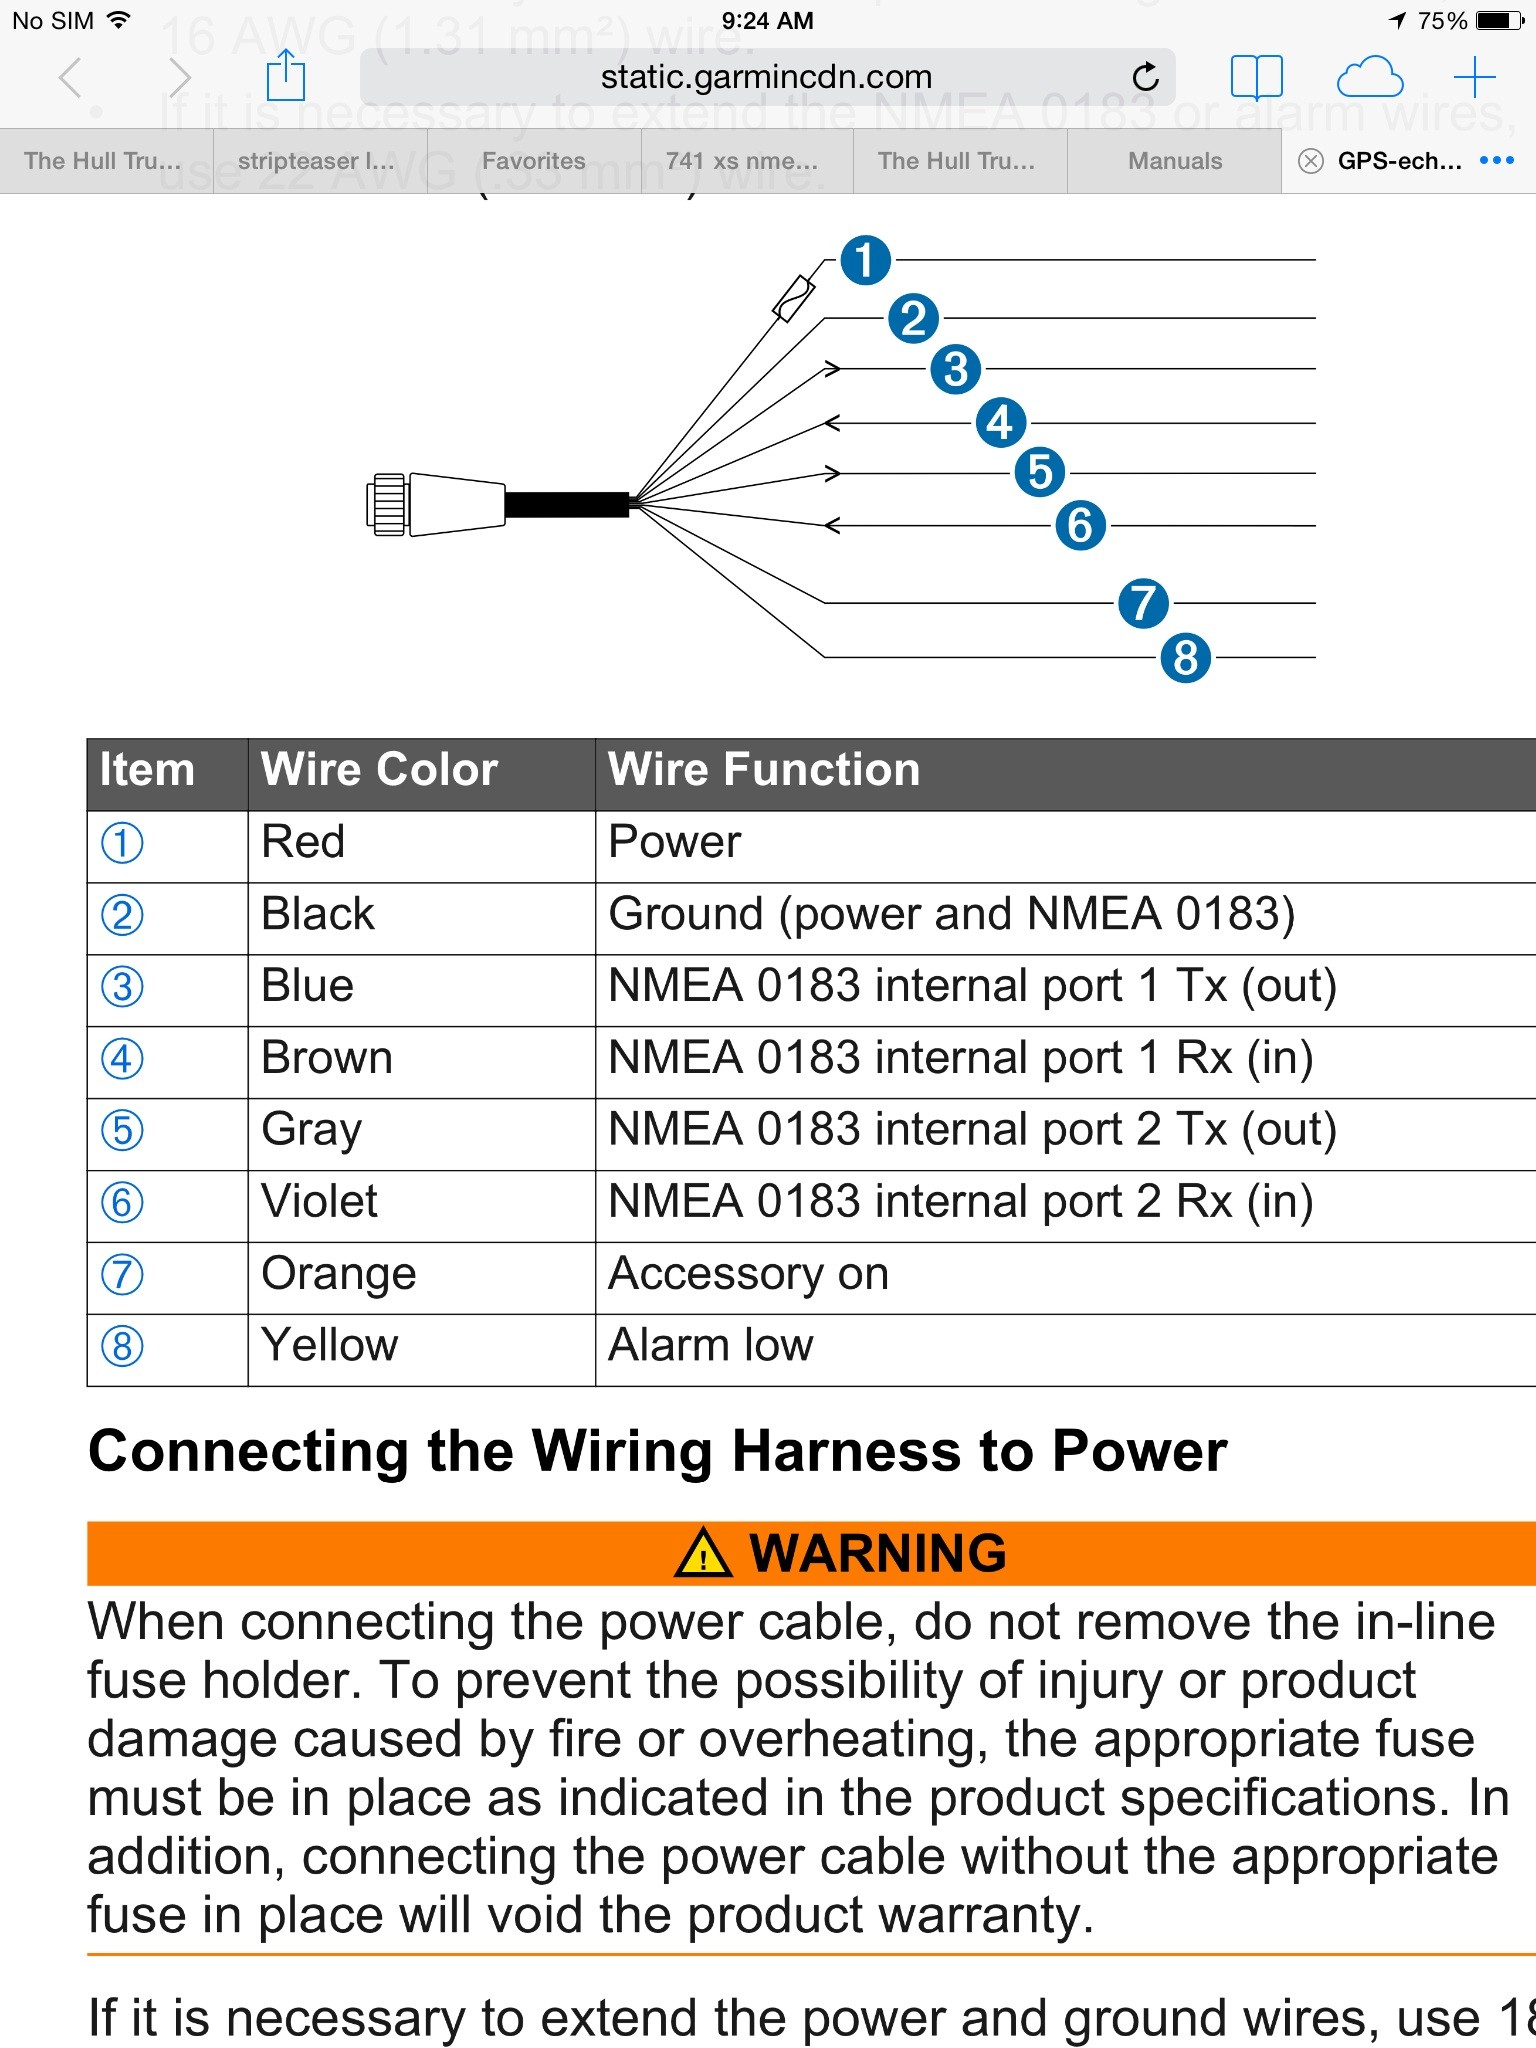 Garmin Transducer Wiring Diagram Clp Nmea 0183 Help to Garmin 741xs the Hull Truth Boating and Of Garmin Transducer Wiring Diagram